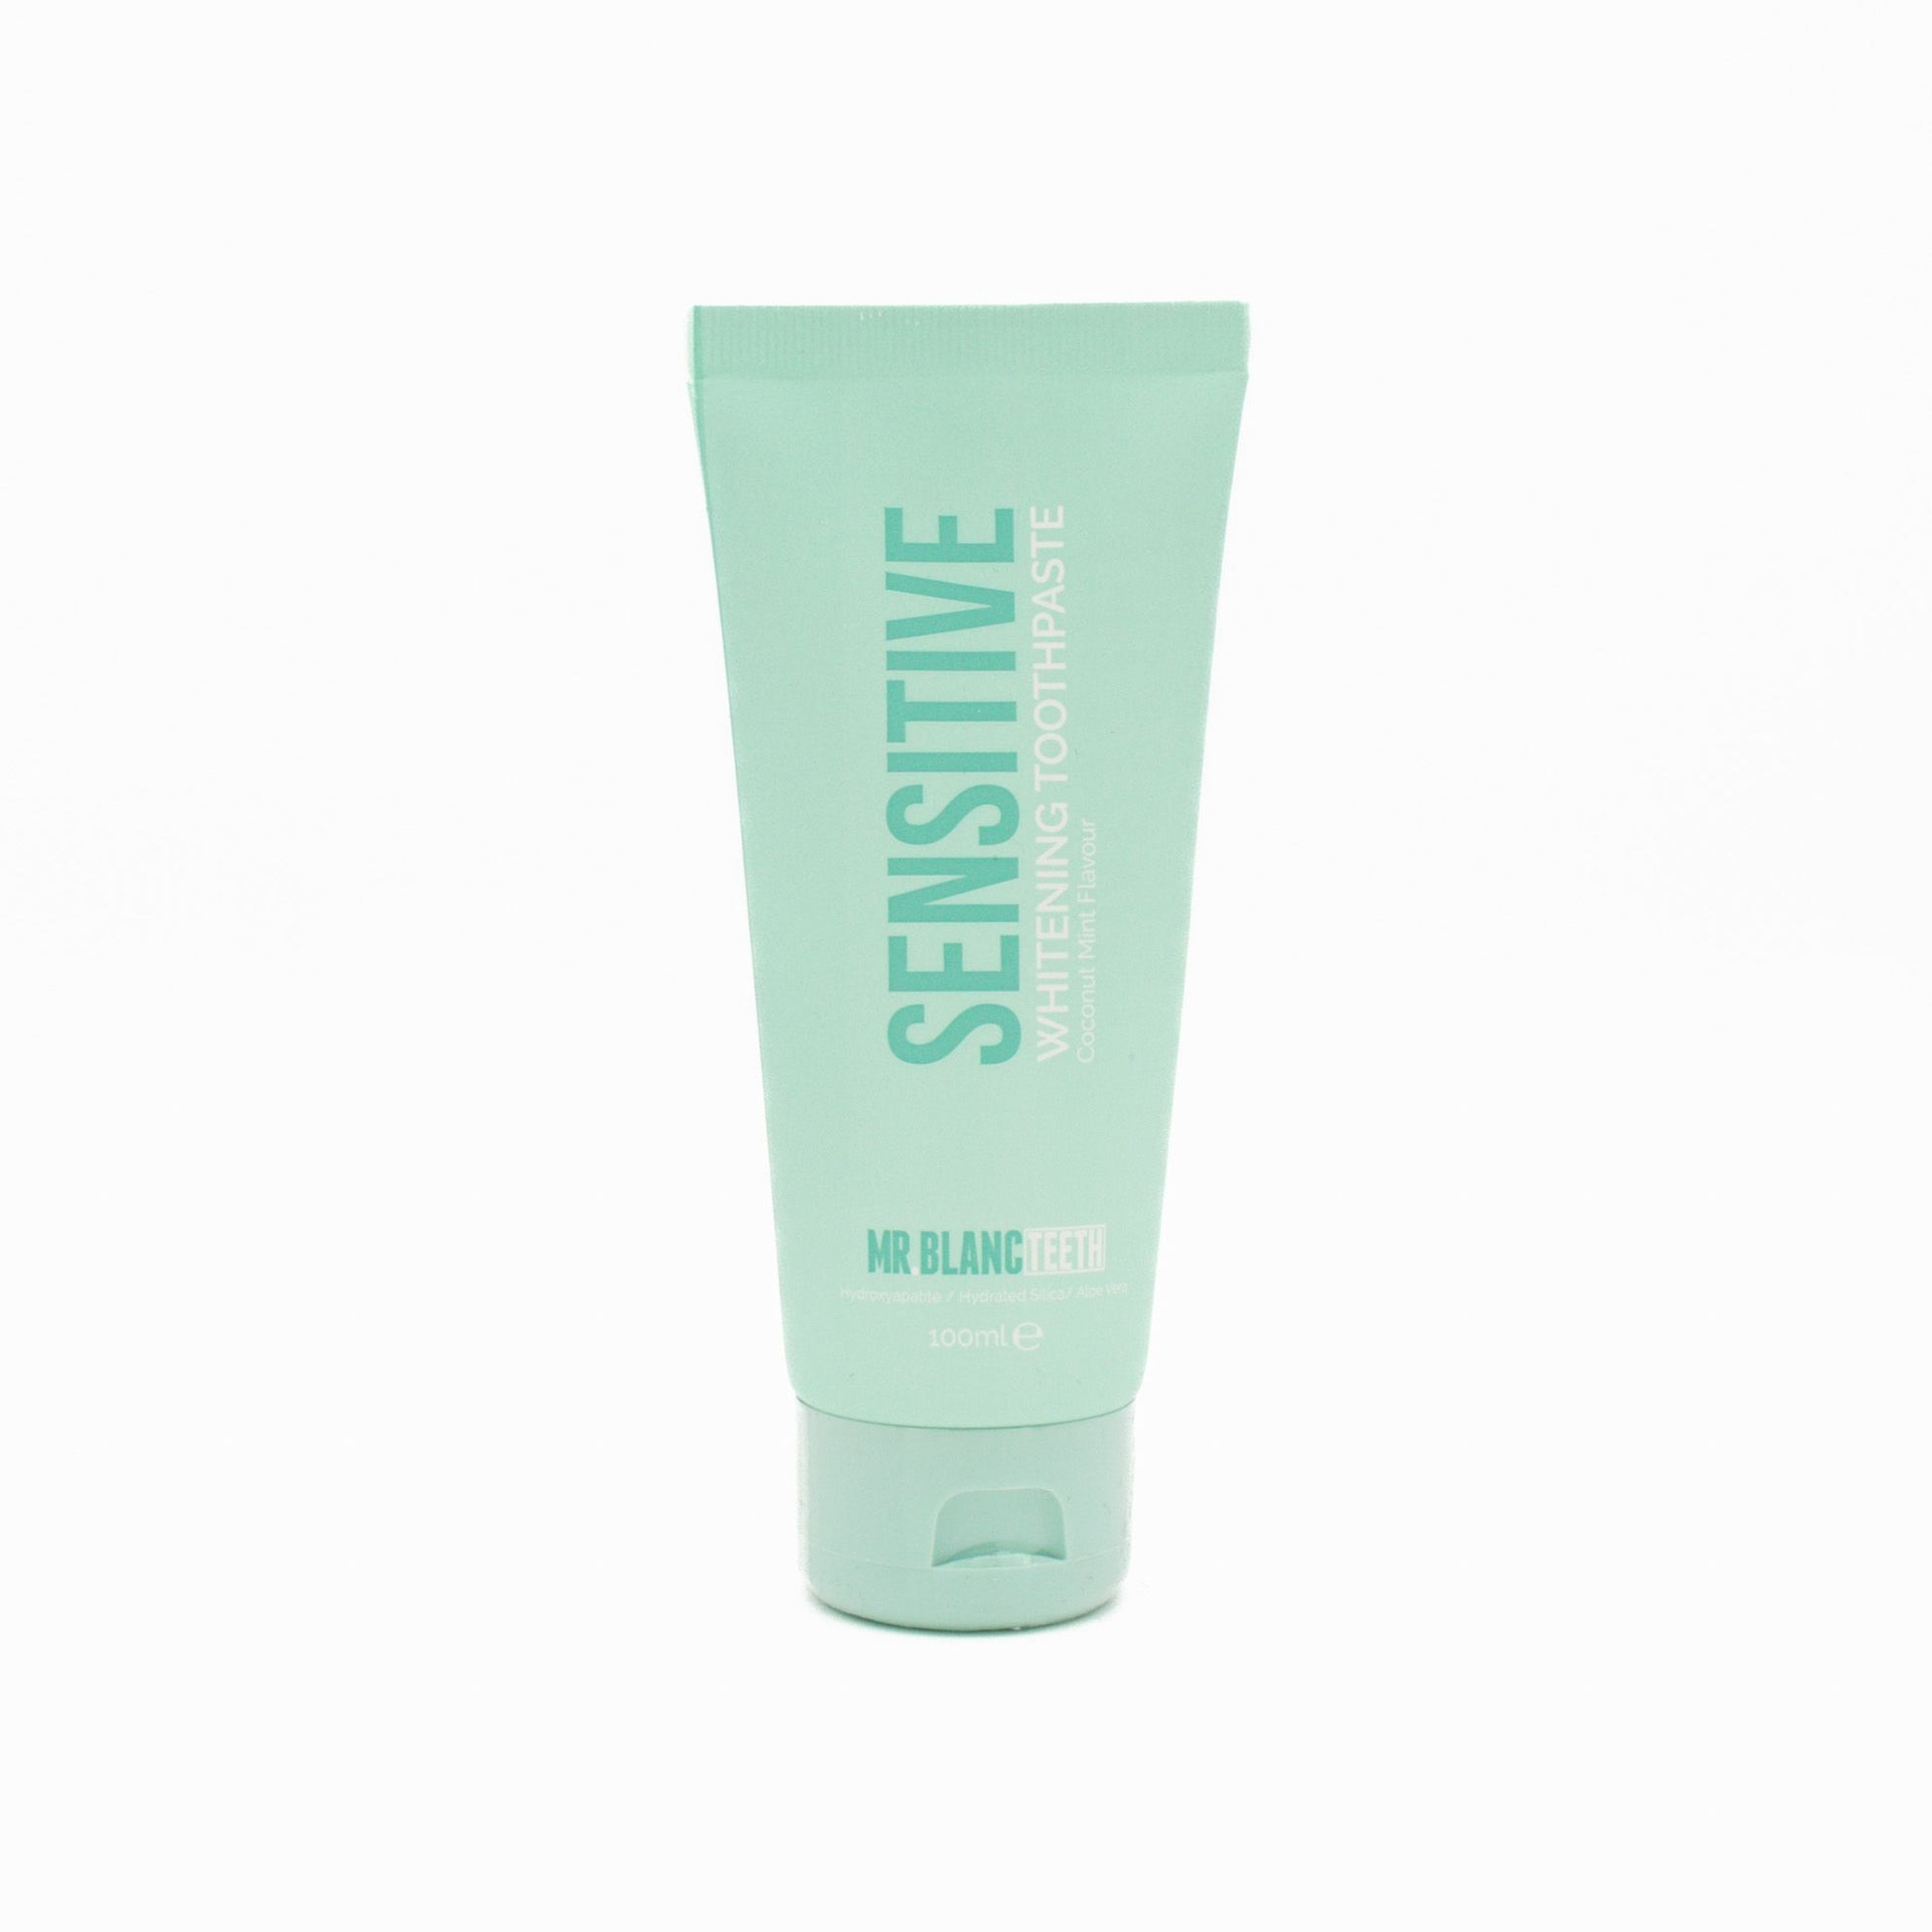 Mr Blanc Coconut Sensitive Whitening Toothpaste 100ml - Imperfect Box - This is Beauty UK